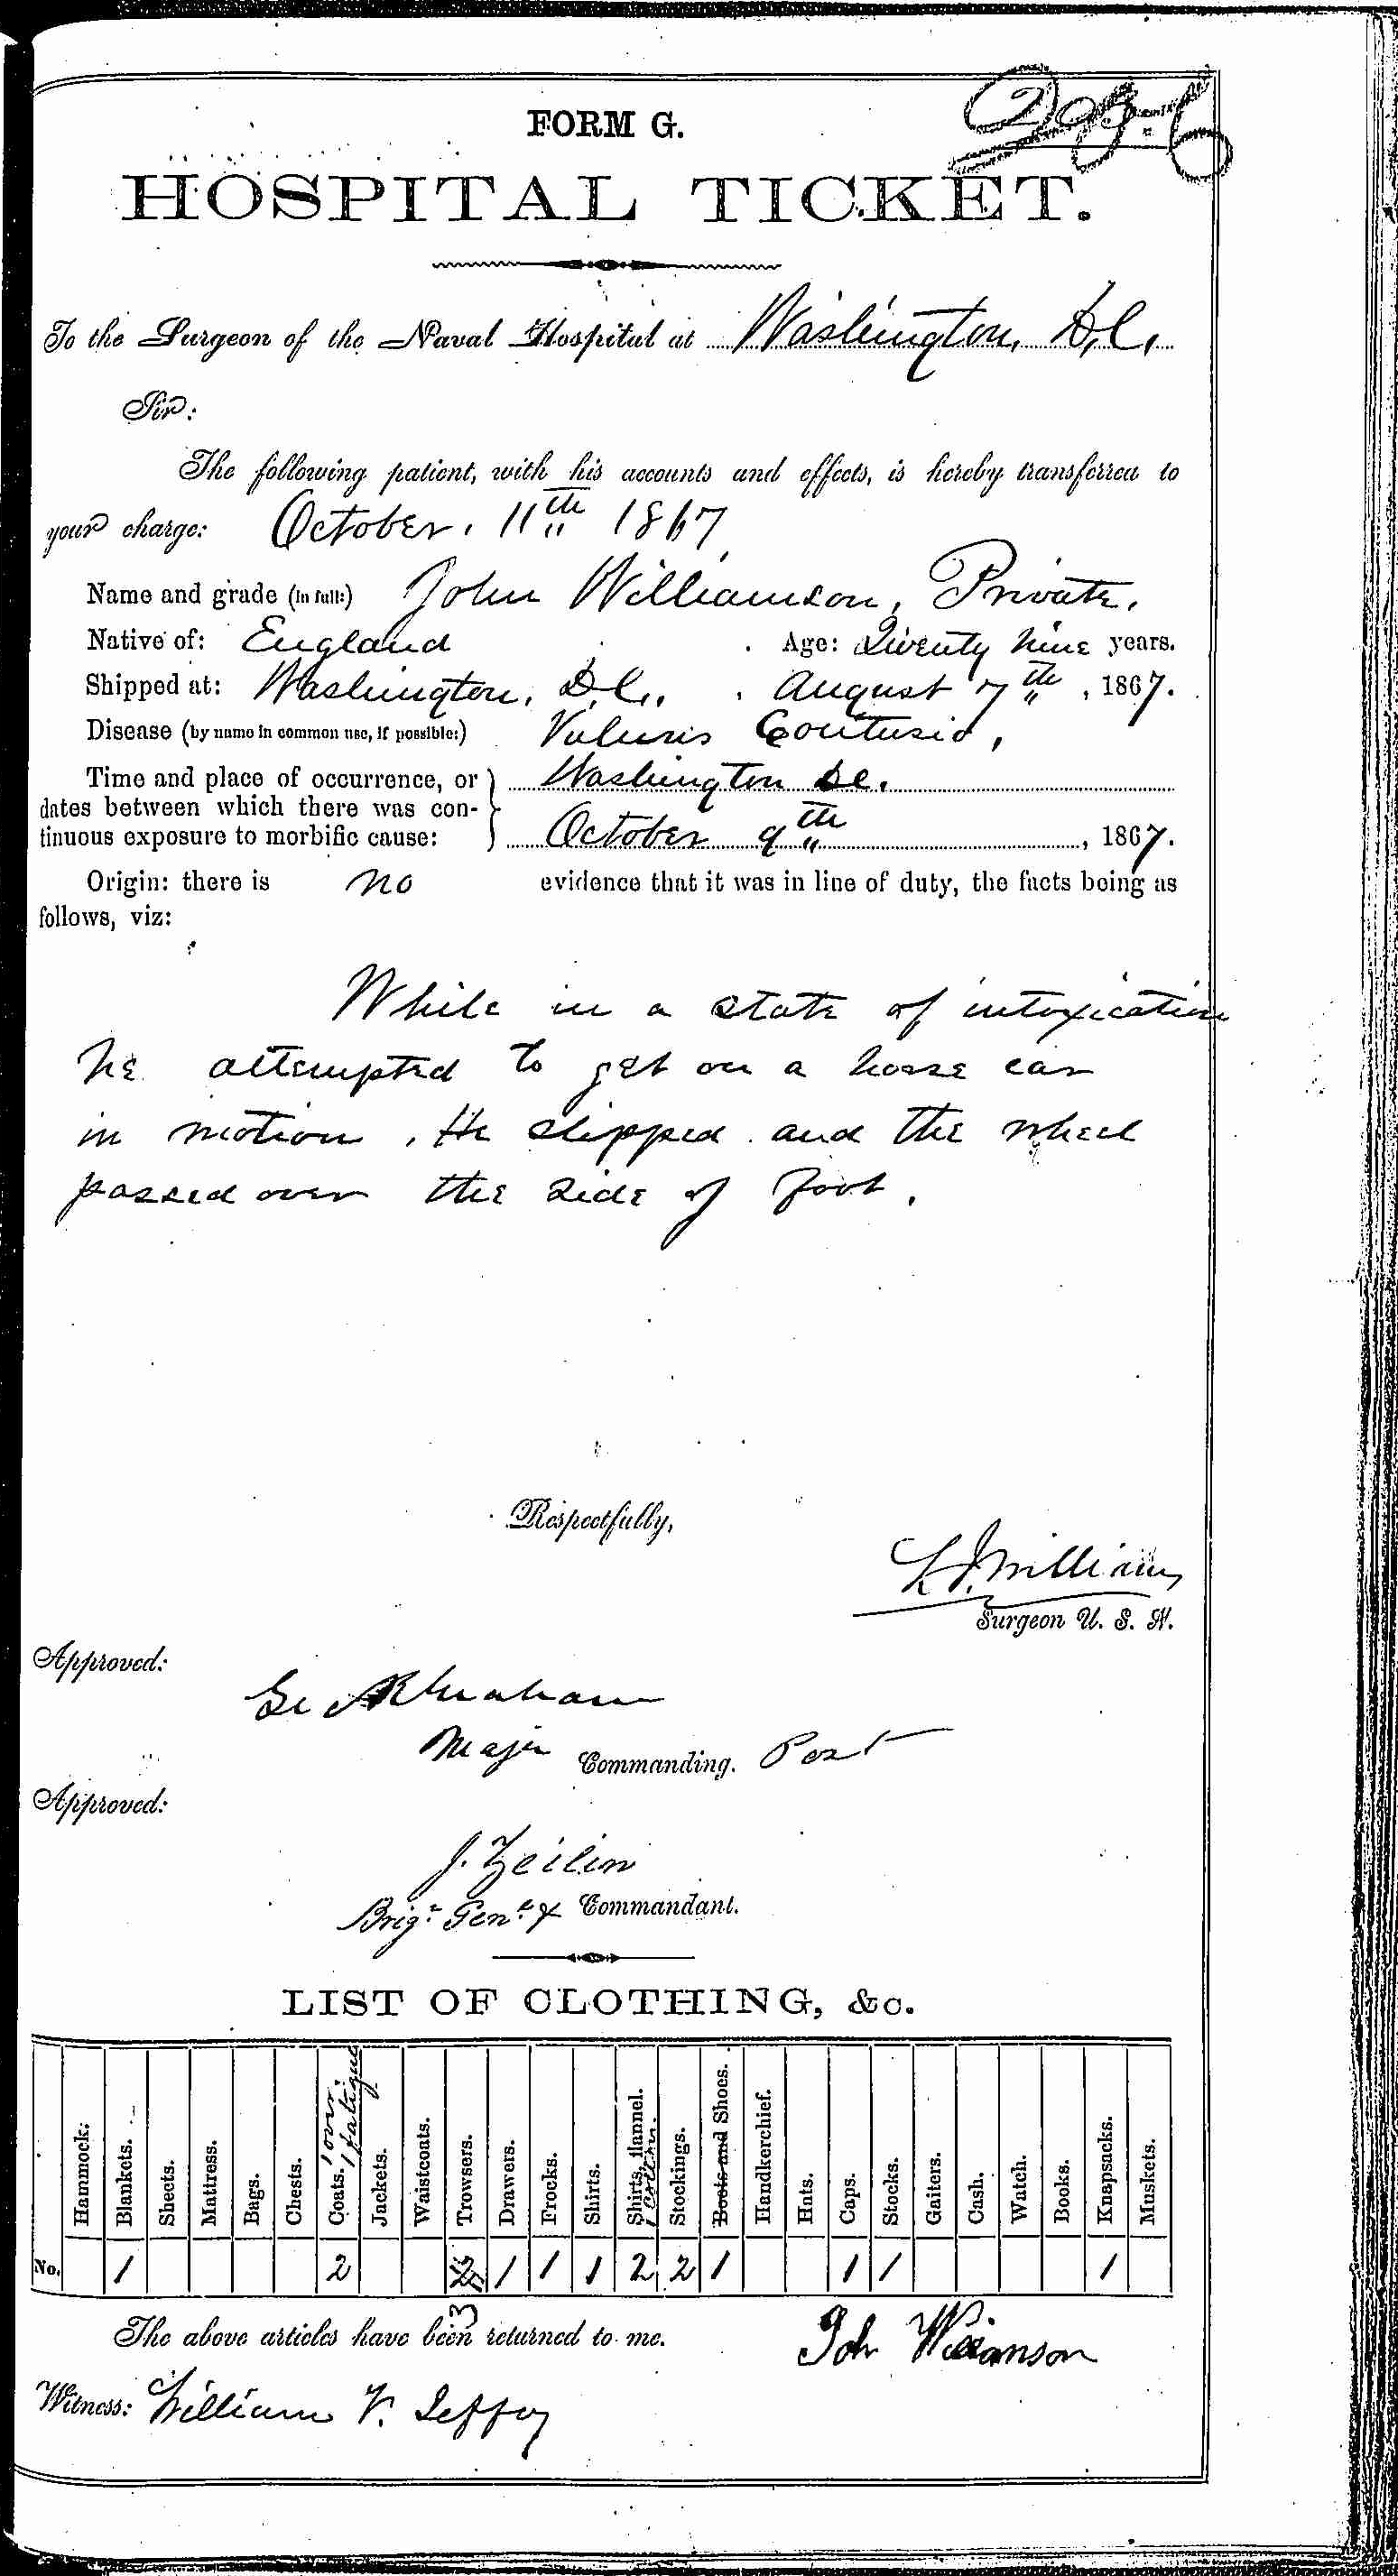 Entry for John Williamson (page 1 of 2) in the log Hospital Tickets and Case Papers - Naval Hospital - Washington, D.C. - 1866-68